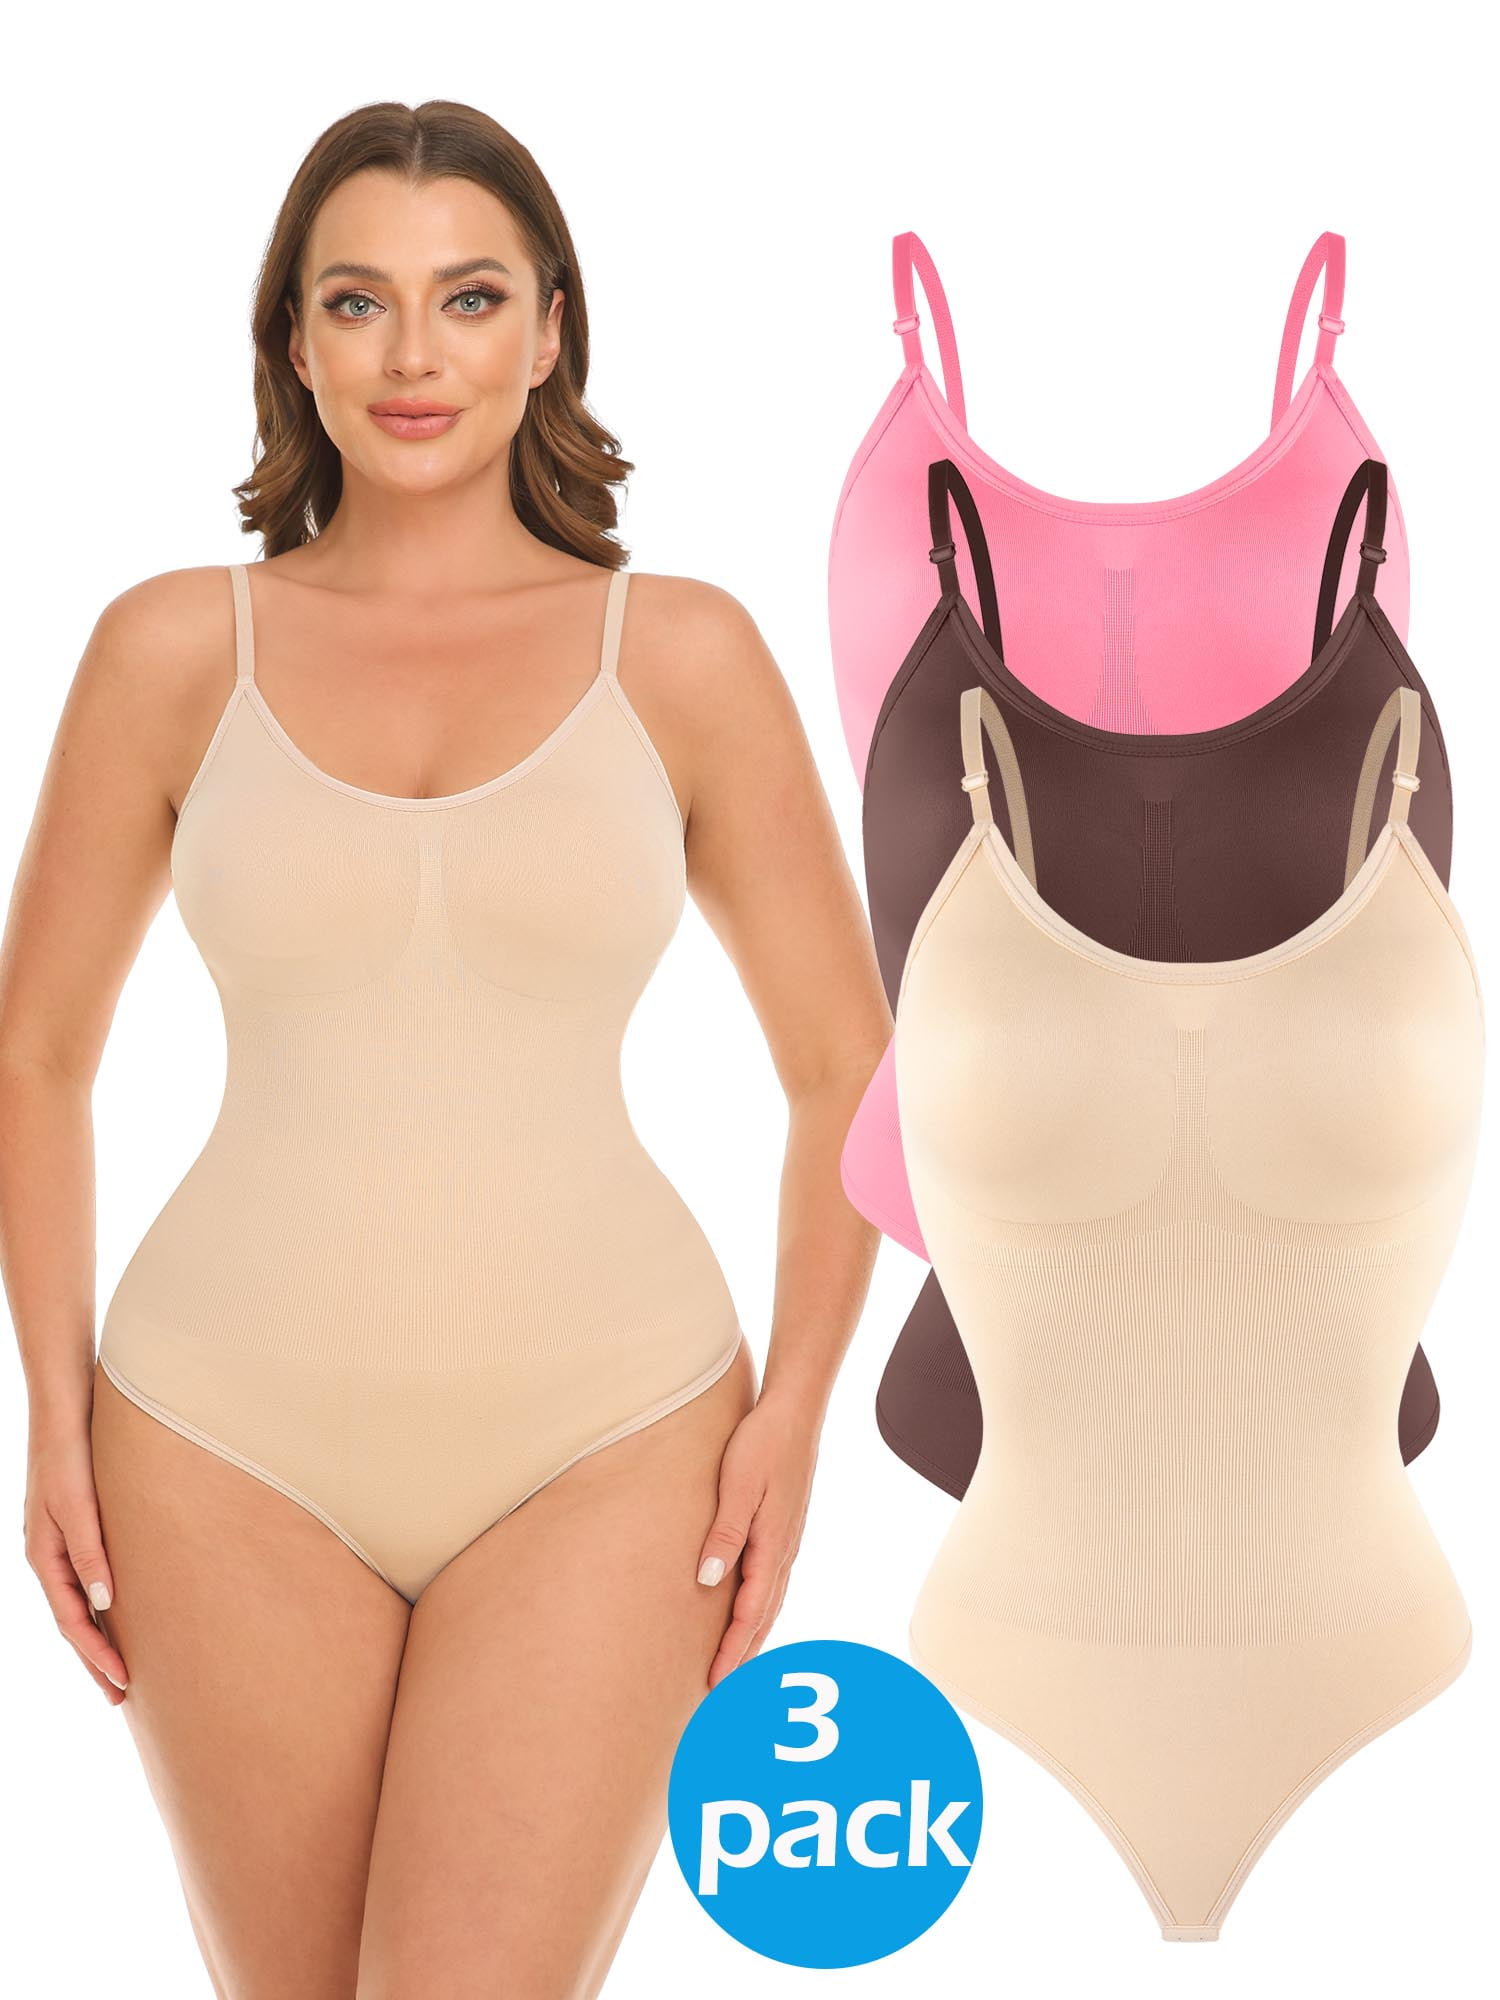 Women's Control Slimming Shapewear Breathable Price in Bangladesh